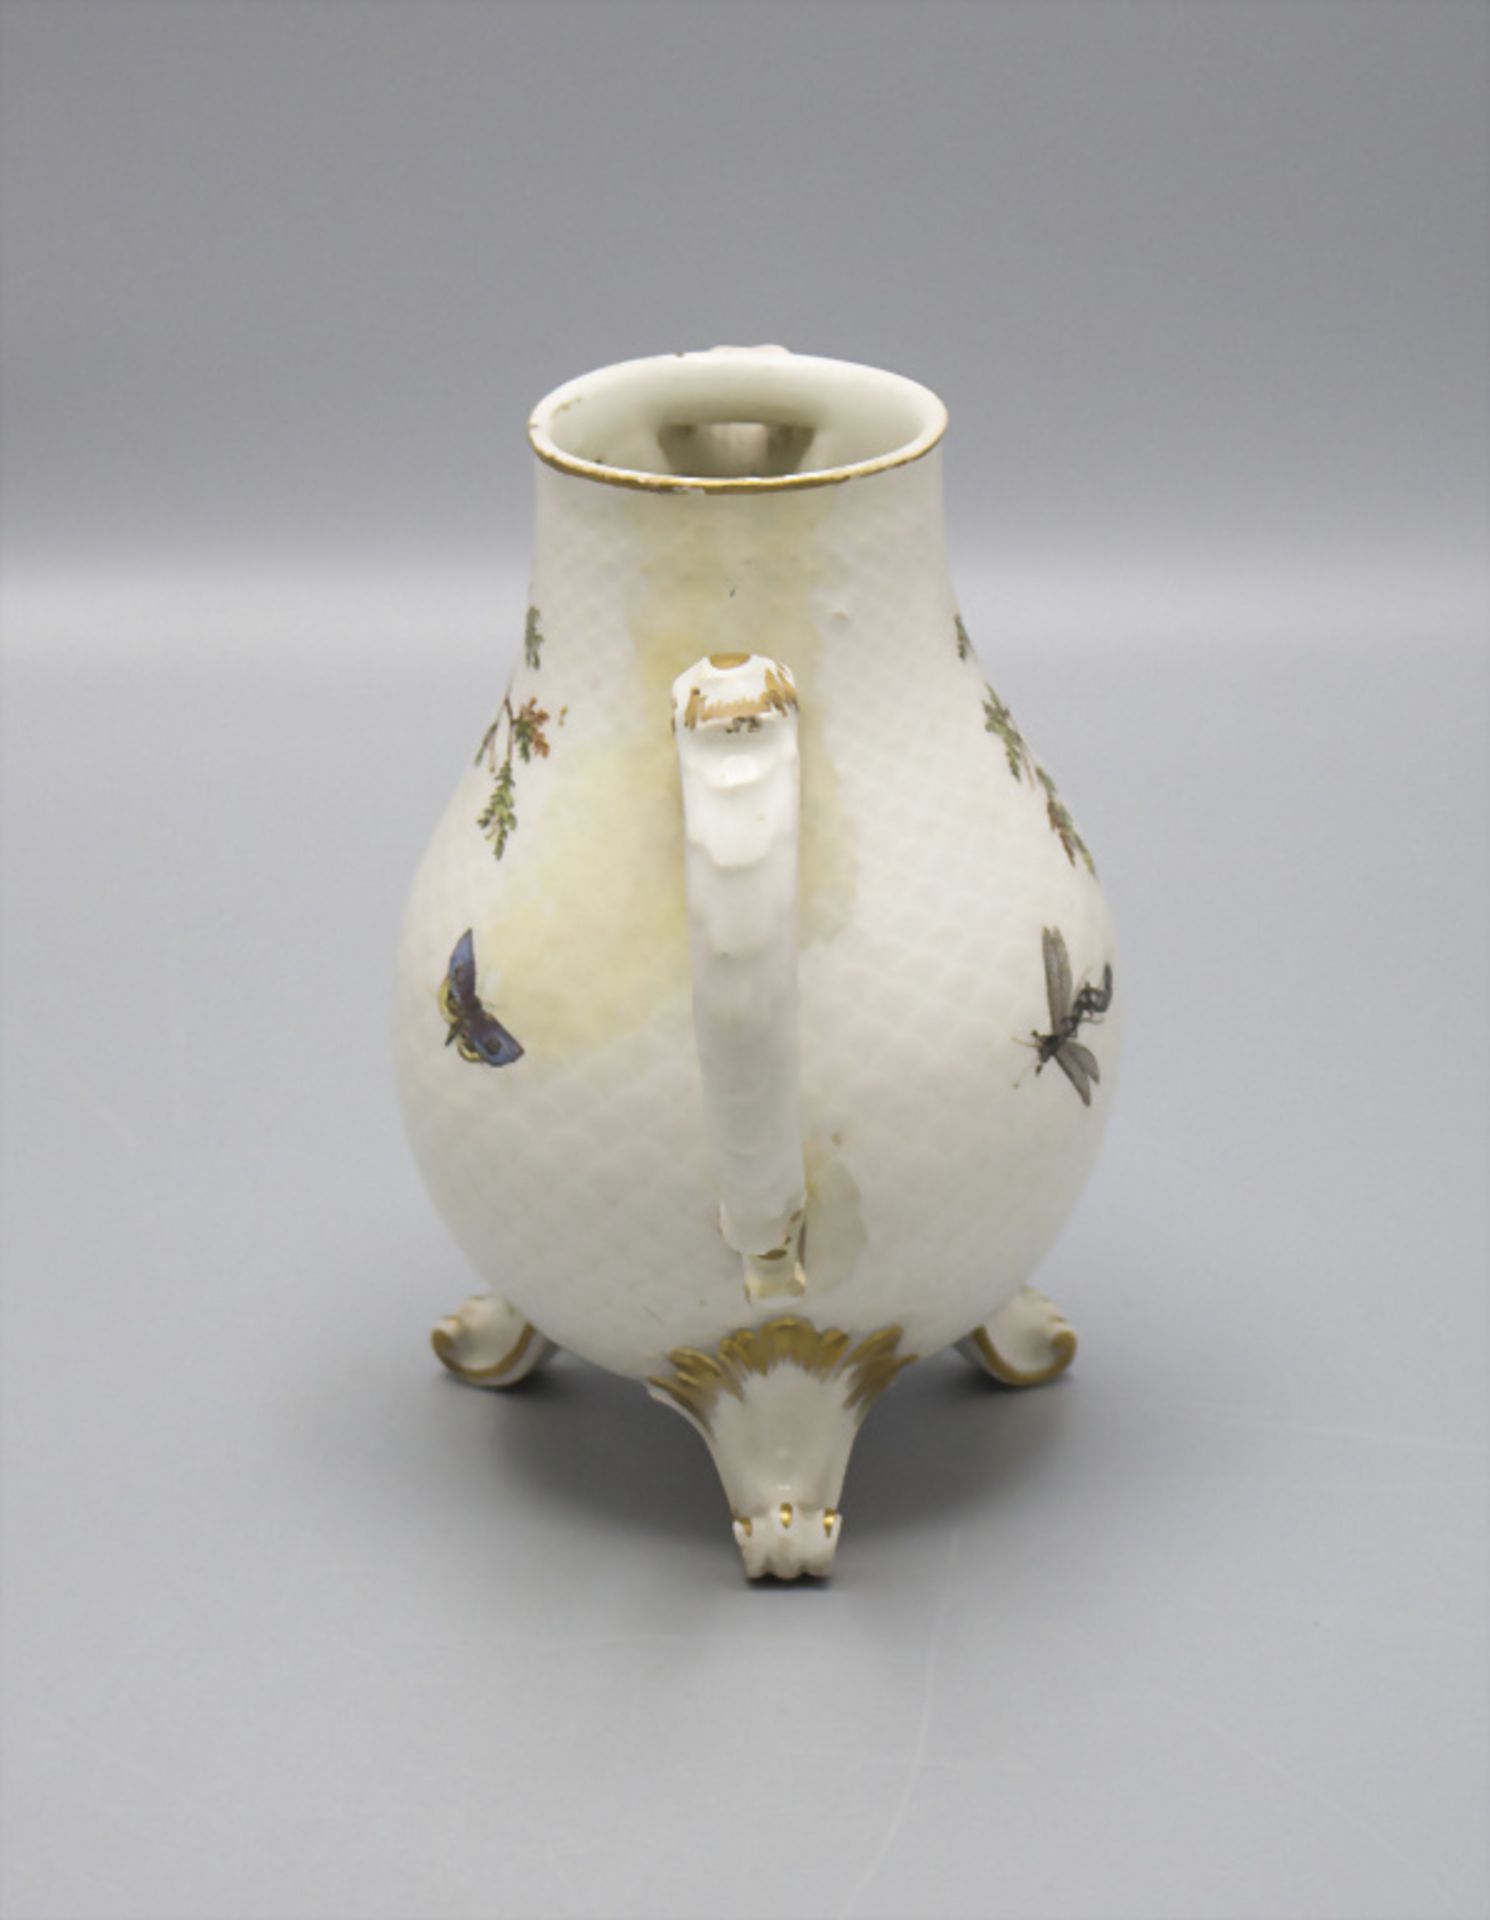 Kanne mit Vogel- u. Insektenmalerei / A porcelain pot with birds and insects, Ludwigsburg, um 1770 - Image 3 of 5